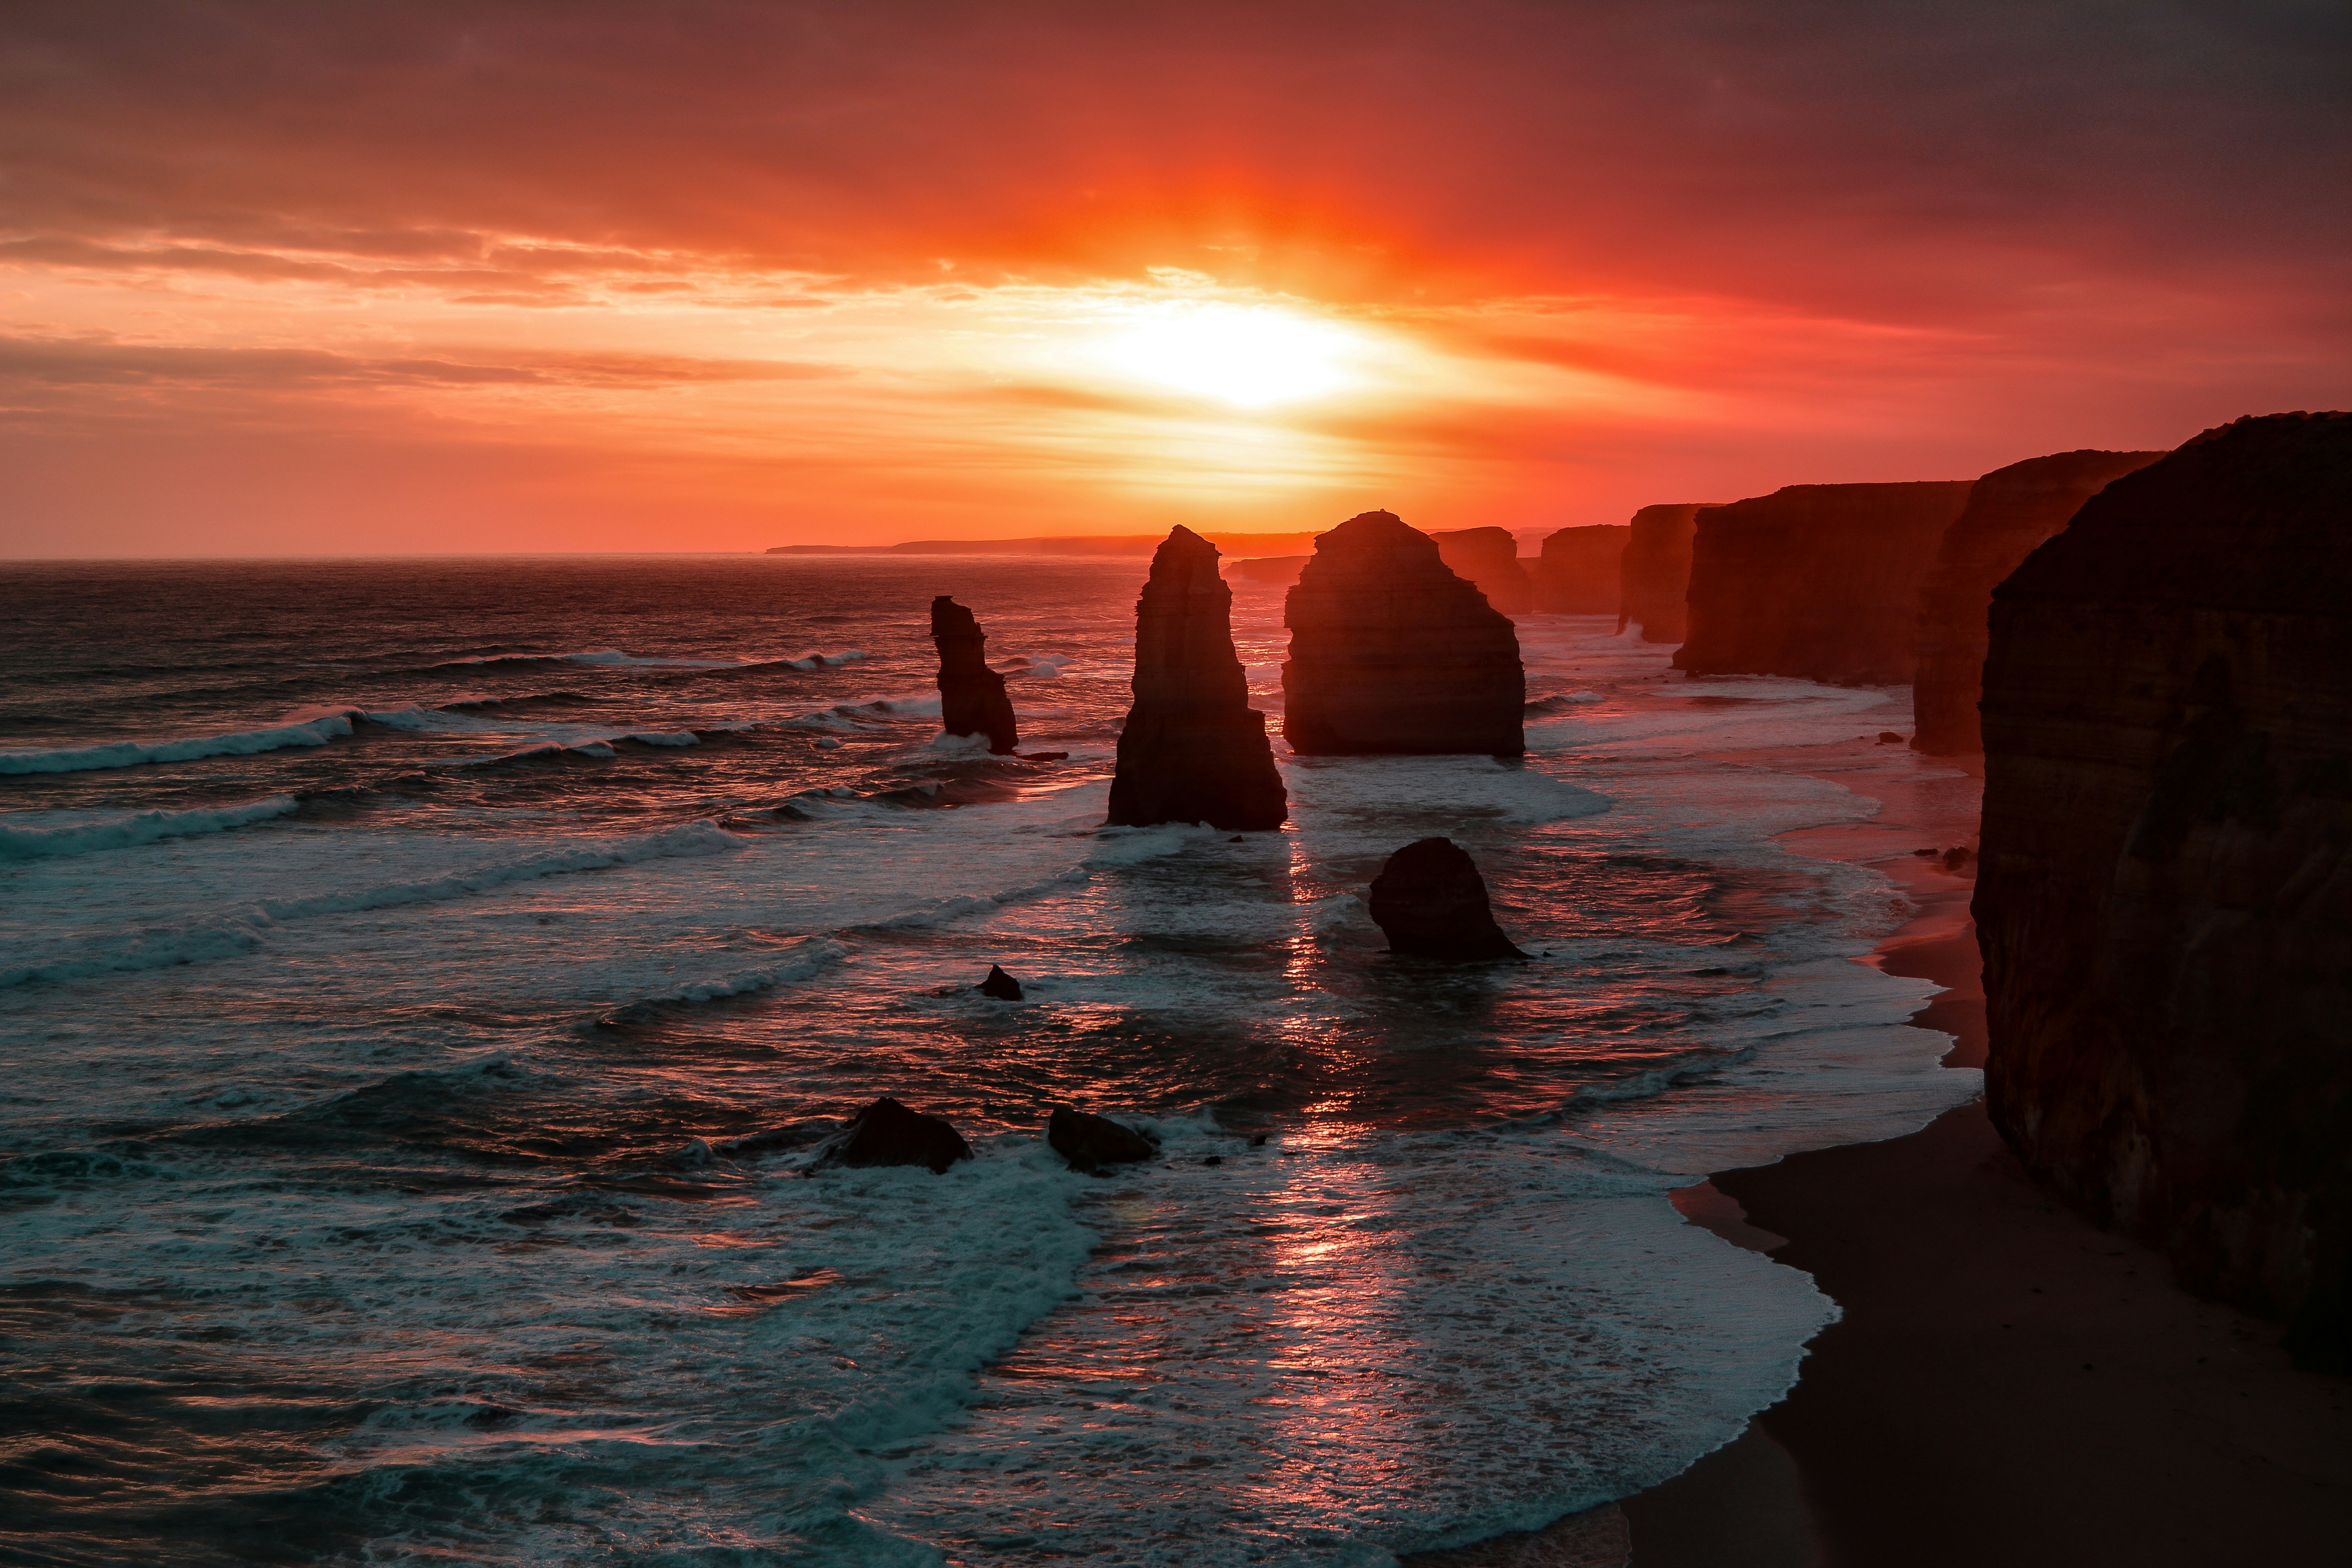 The 12 Apostles on the Great Ocean Road in Victoria is truly a sight to behold. This stunning section of coastline, boasting monoliths protruding from the ocean, is often overcrowded with tourists. I was very fortunate to arrive as the sun was setting and captured some magical shots.